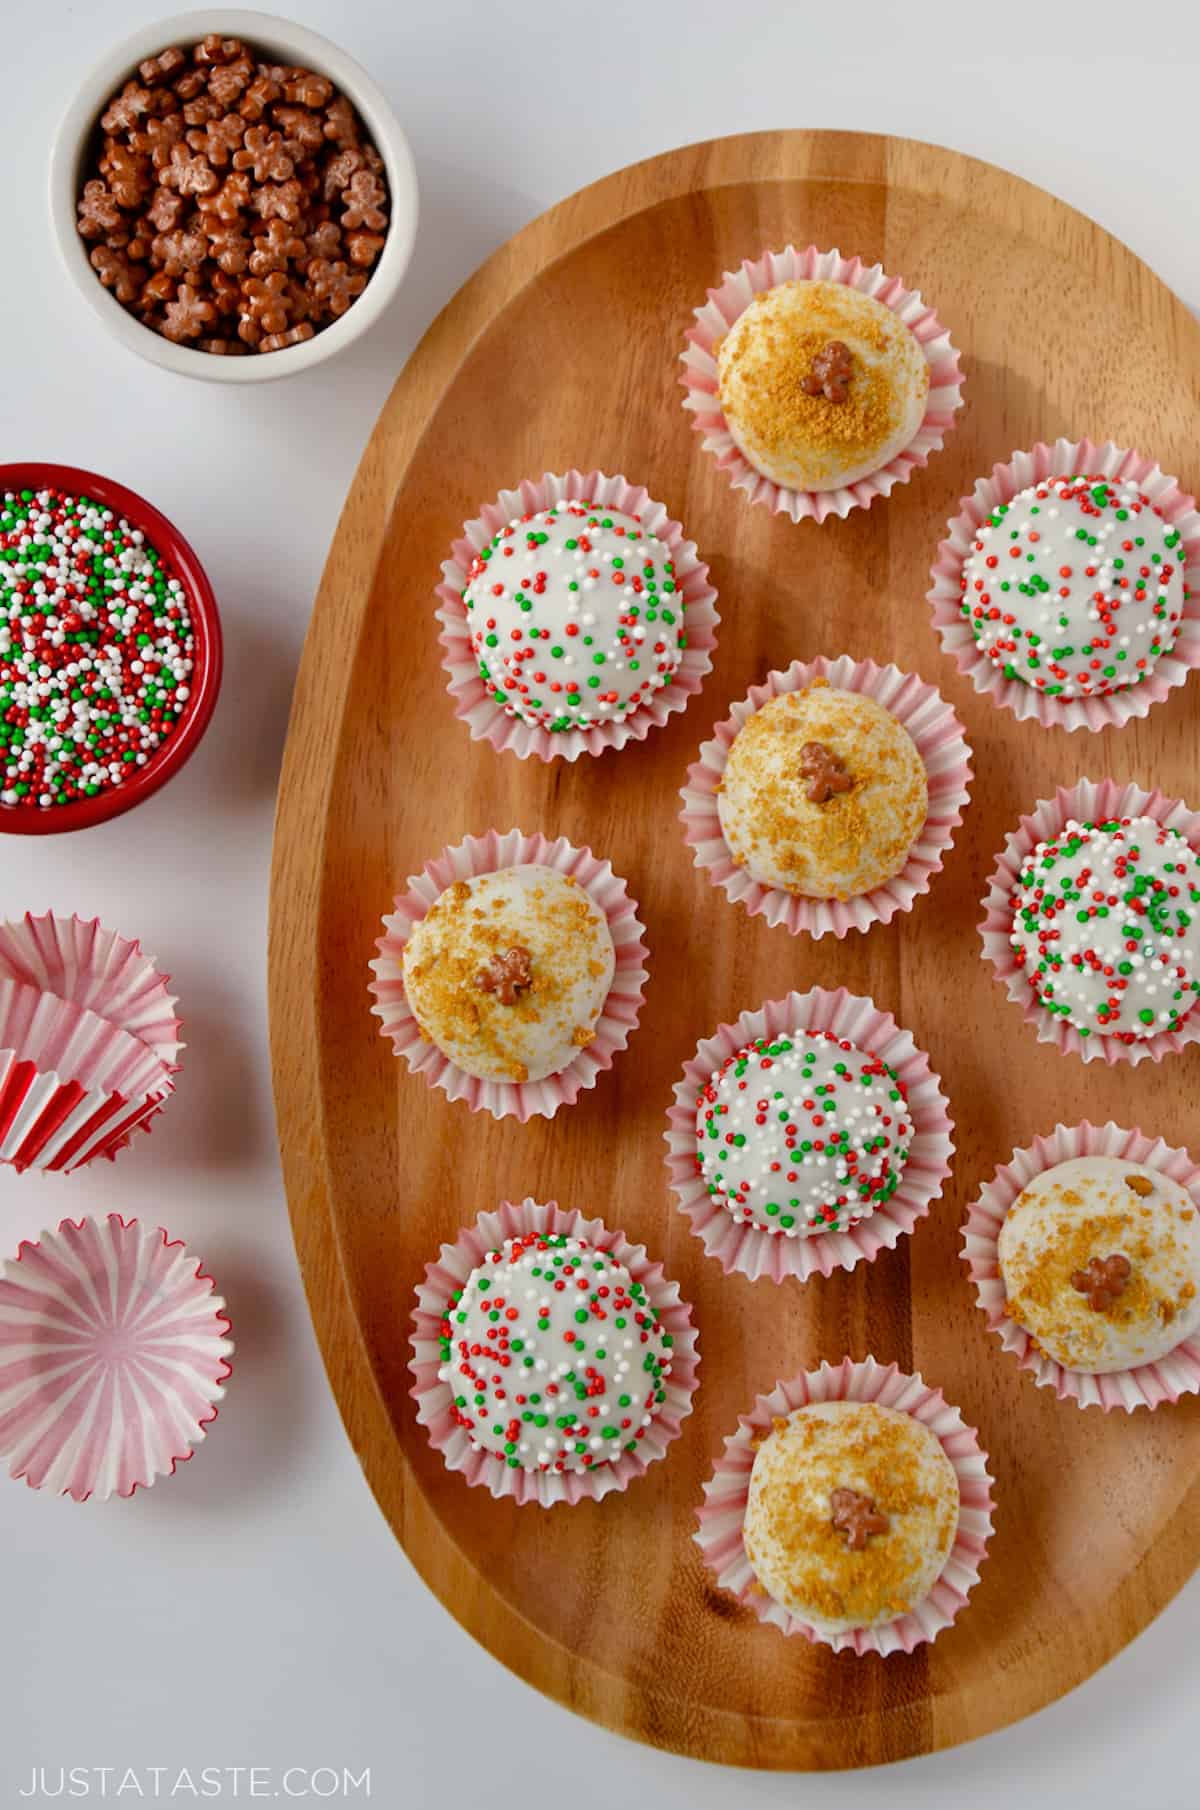 A wooden platter holding 10 chocolate- and sprinkle-covered gingerbread cookie balls in red-and-white striped wrappers. More wrappers and two small bowls of sprinkles sit beside the platter.